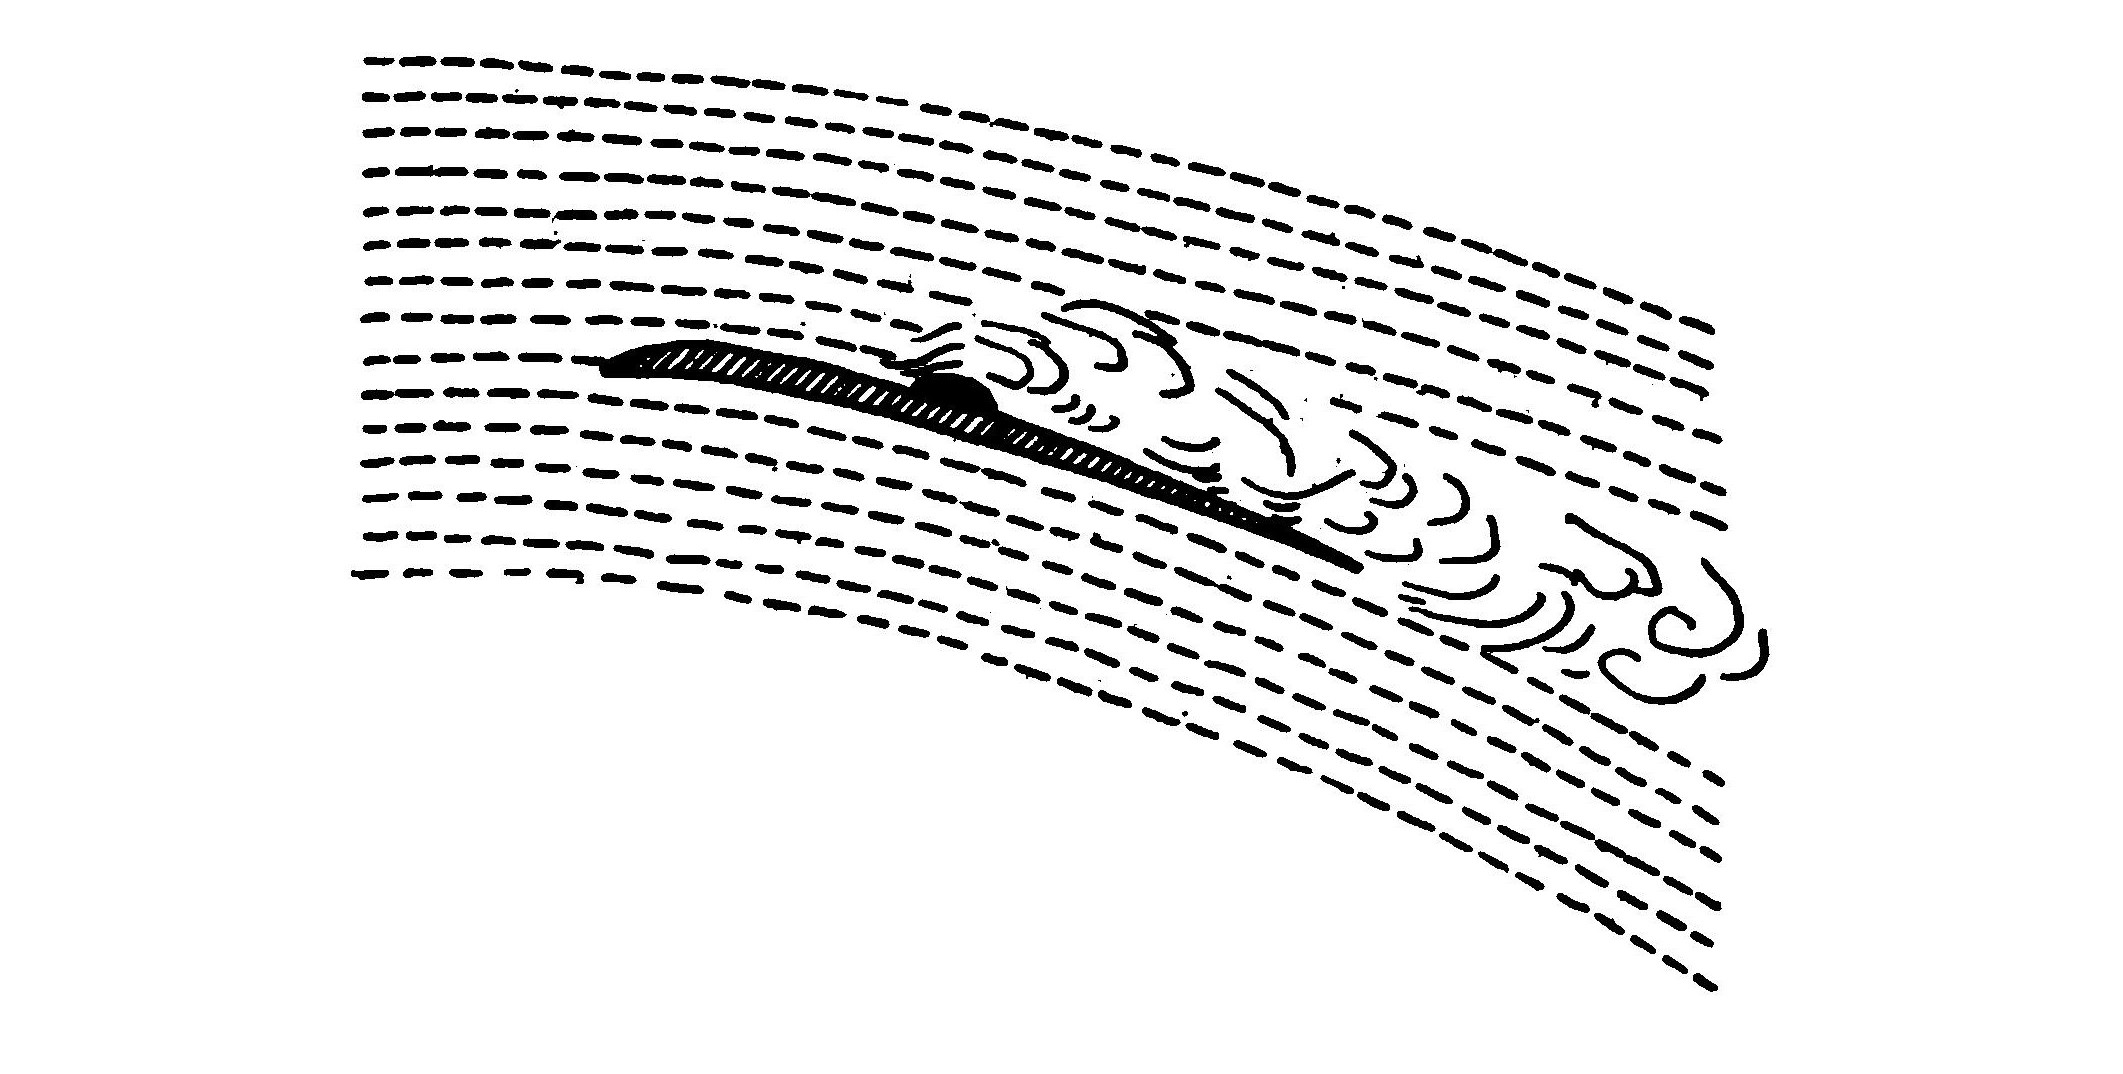 FIG. 7. Showing the disturbance created by a small spar on the back of a plane.